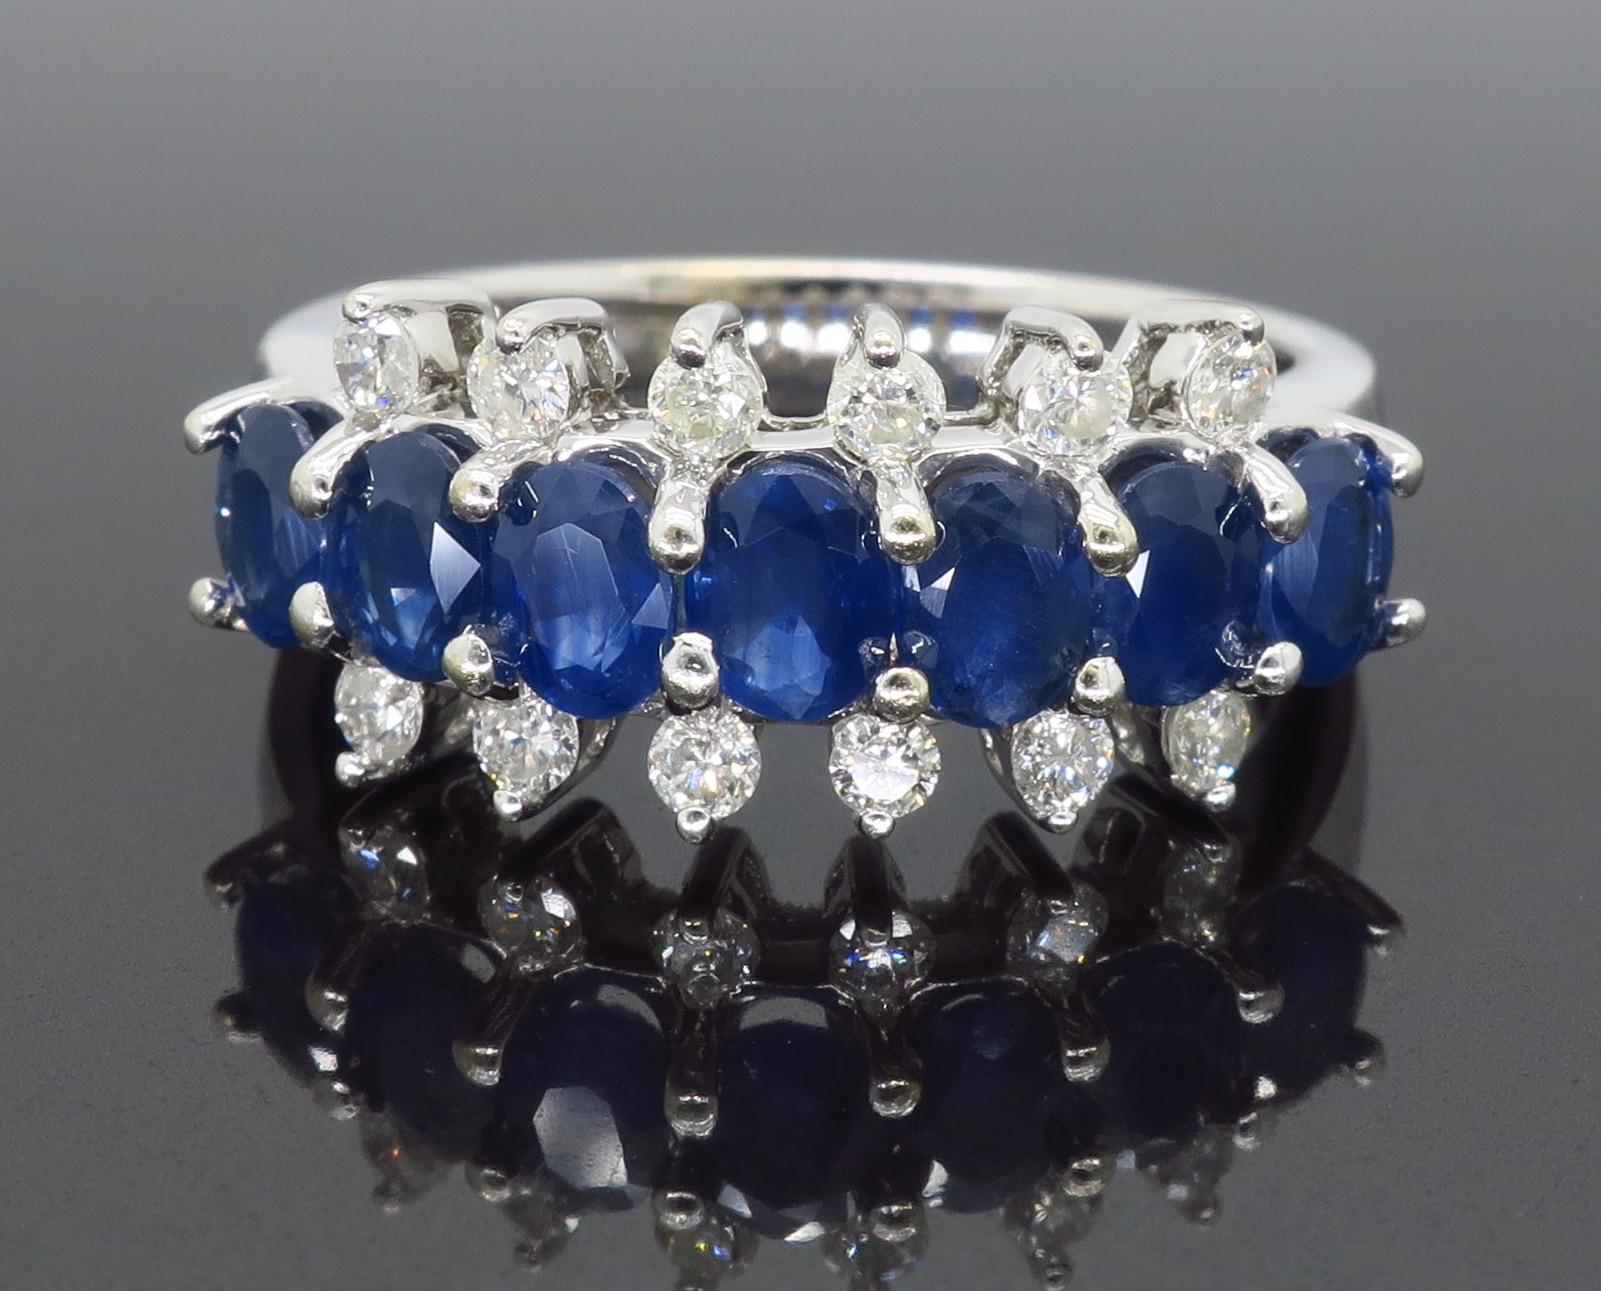 Sapphire and diamond band style ring crafted in 14k white gold. 

Gemstone: Sapphire & Diamond
Gemstone Carat Weight: Approximately 1.60CTW 
Diamond Carat Weight:  Approximately .45CTW
Diamond Cut: Round Brilliant Cut
Color: Average G-I
Clarity: